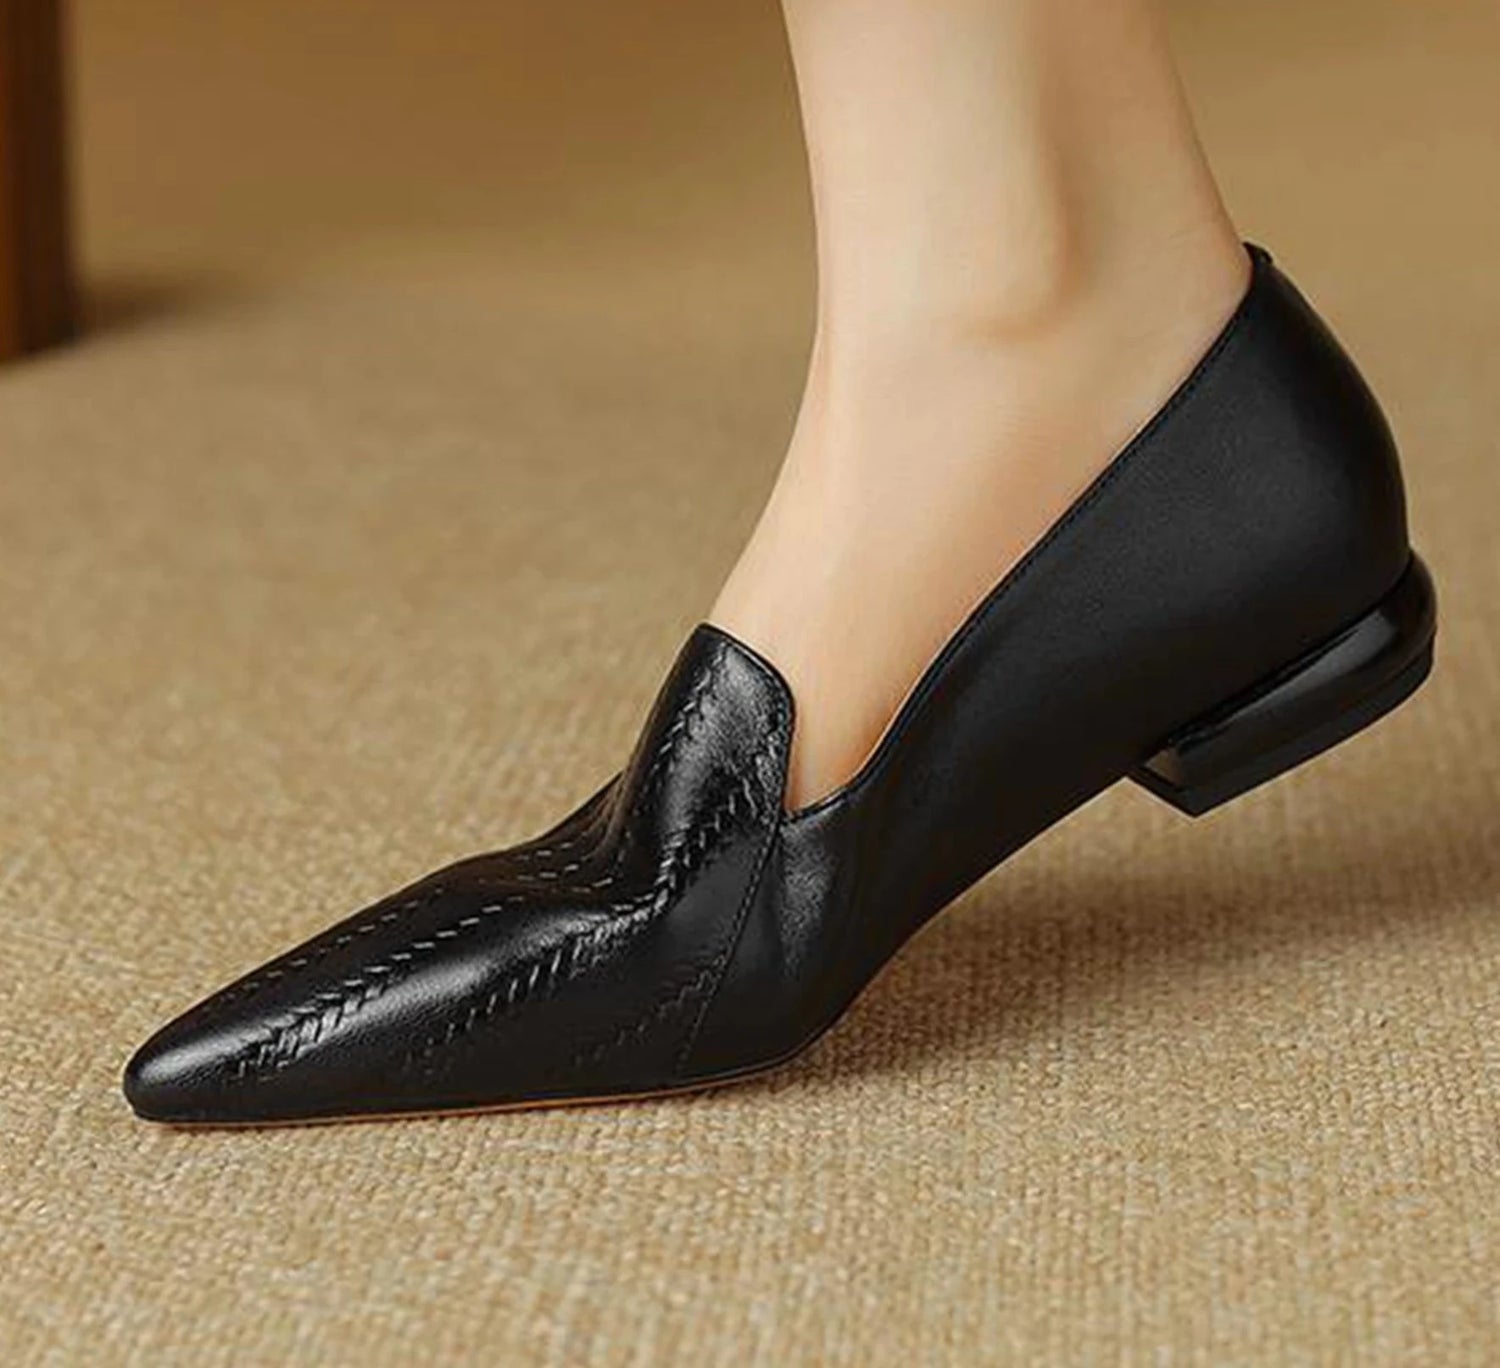 Full Grain Leather Low Heels Spring Brand Shoes Slip On Vintage Pointed Toe Women Pumps KilyClothing